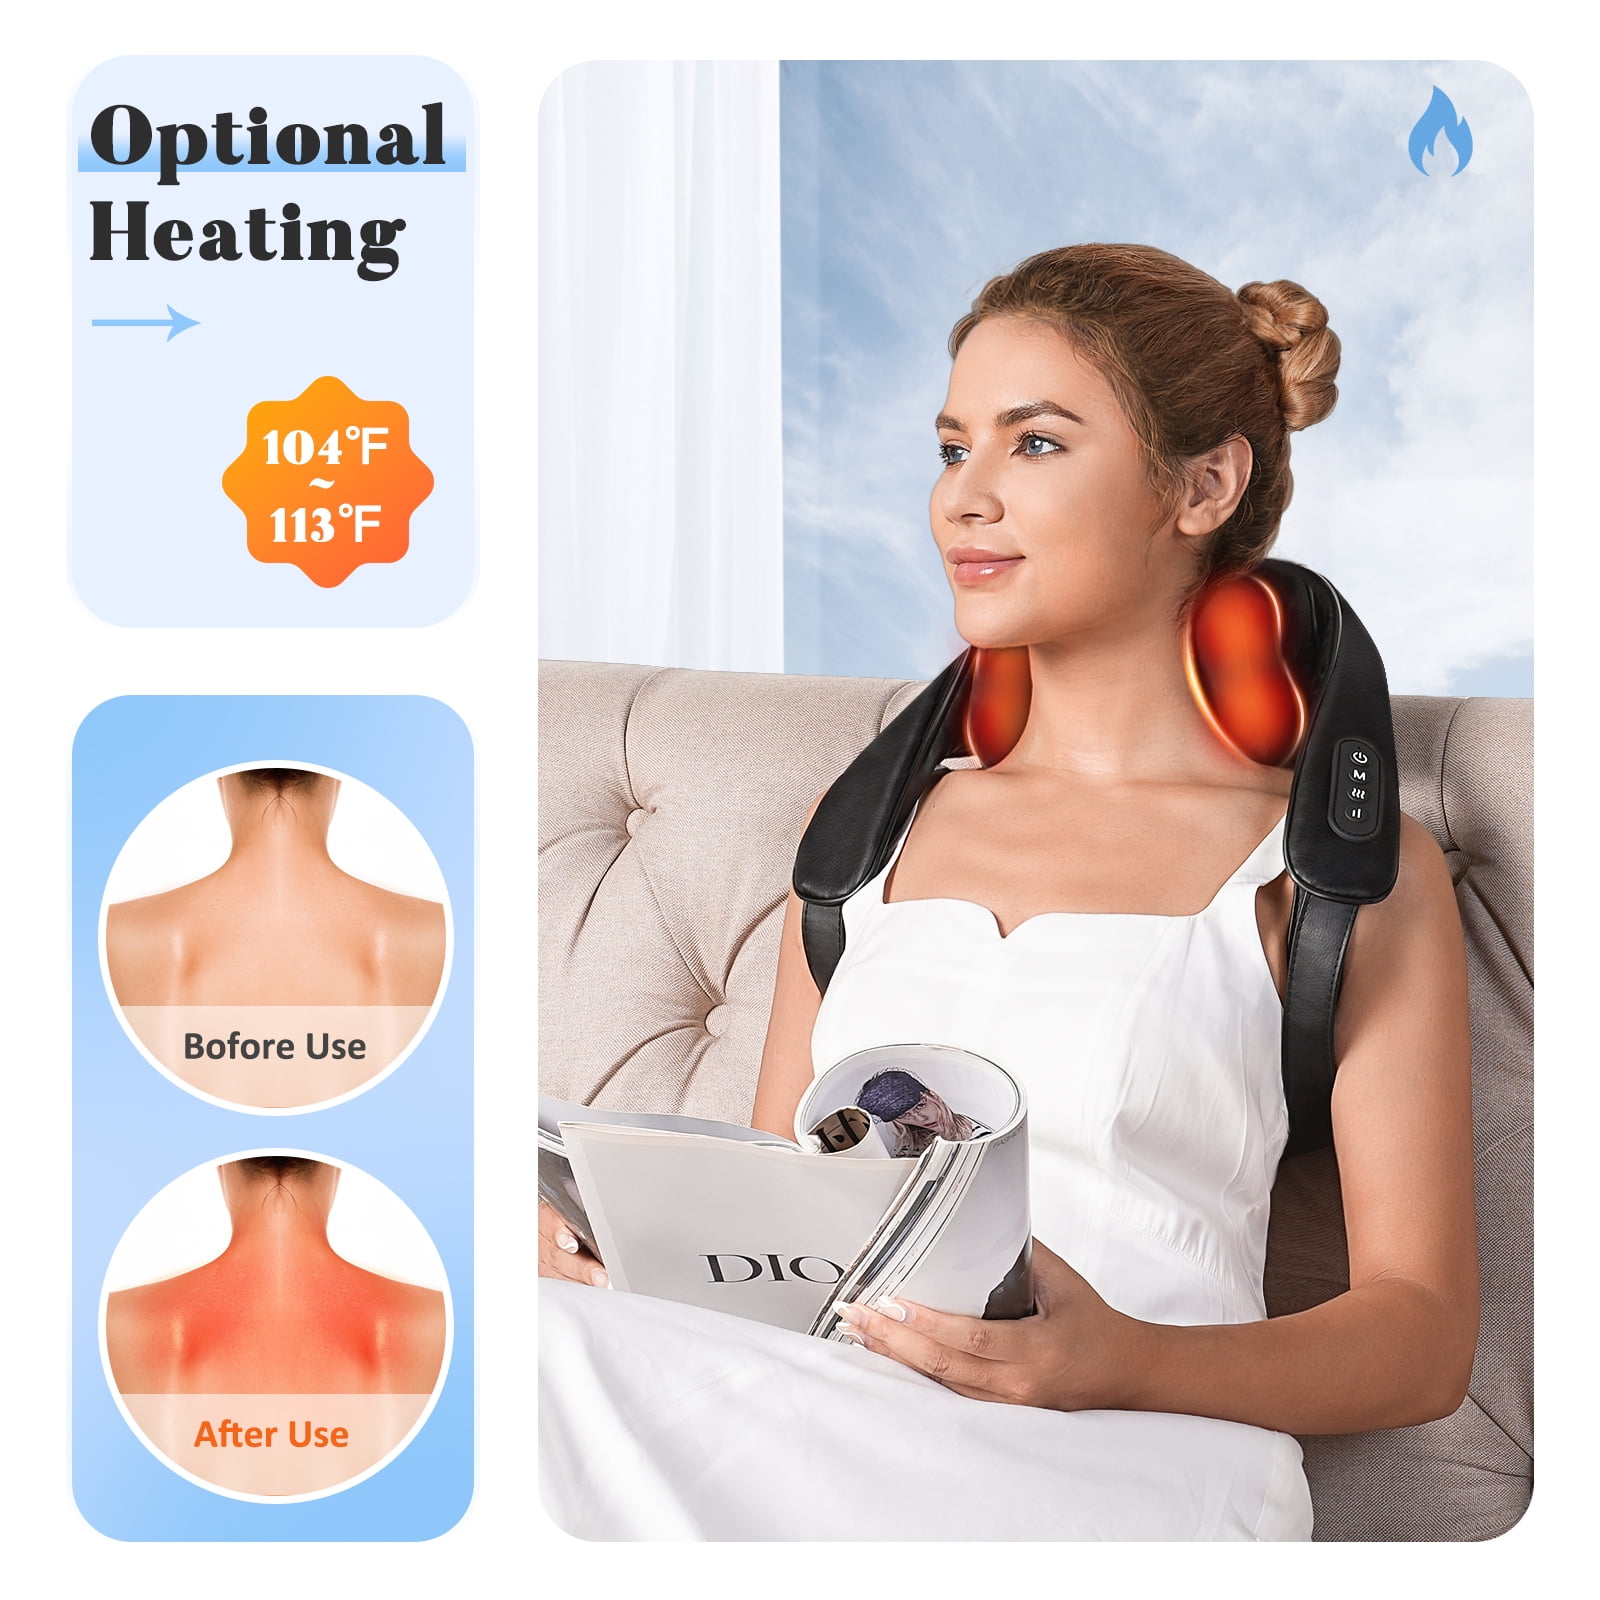  Shiatsu Neck Massager With Heat, 8 Massage Nodes Neck Massager  For Pain Relief Deep Tissue, 4D Deep Kneading Electric Neck And Shoulder  Massager, Gift For Mom, Dad, Men, Women, Office, Home